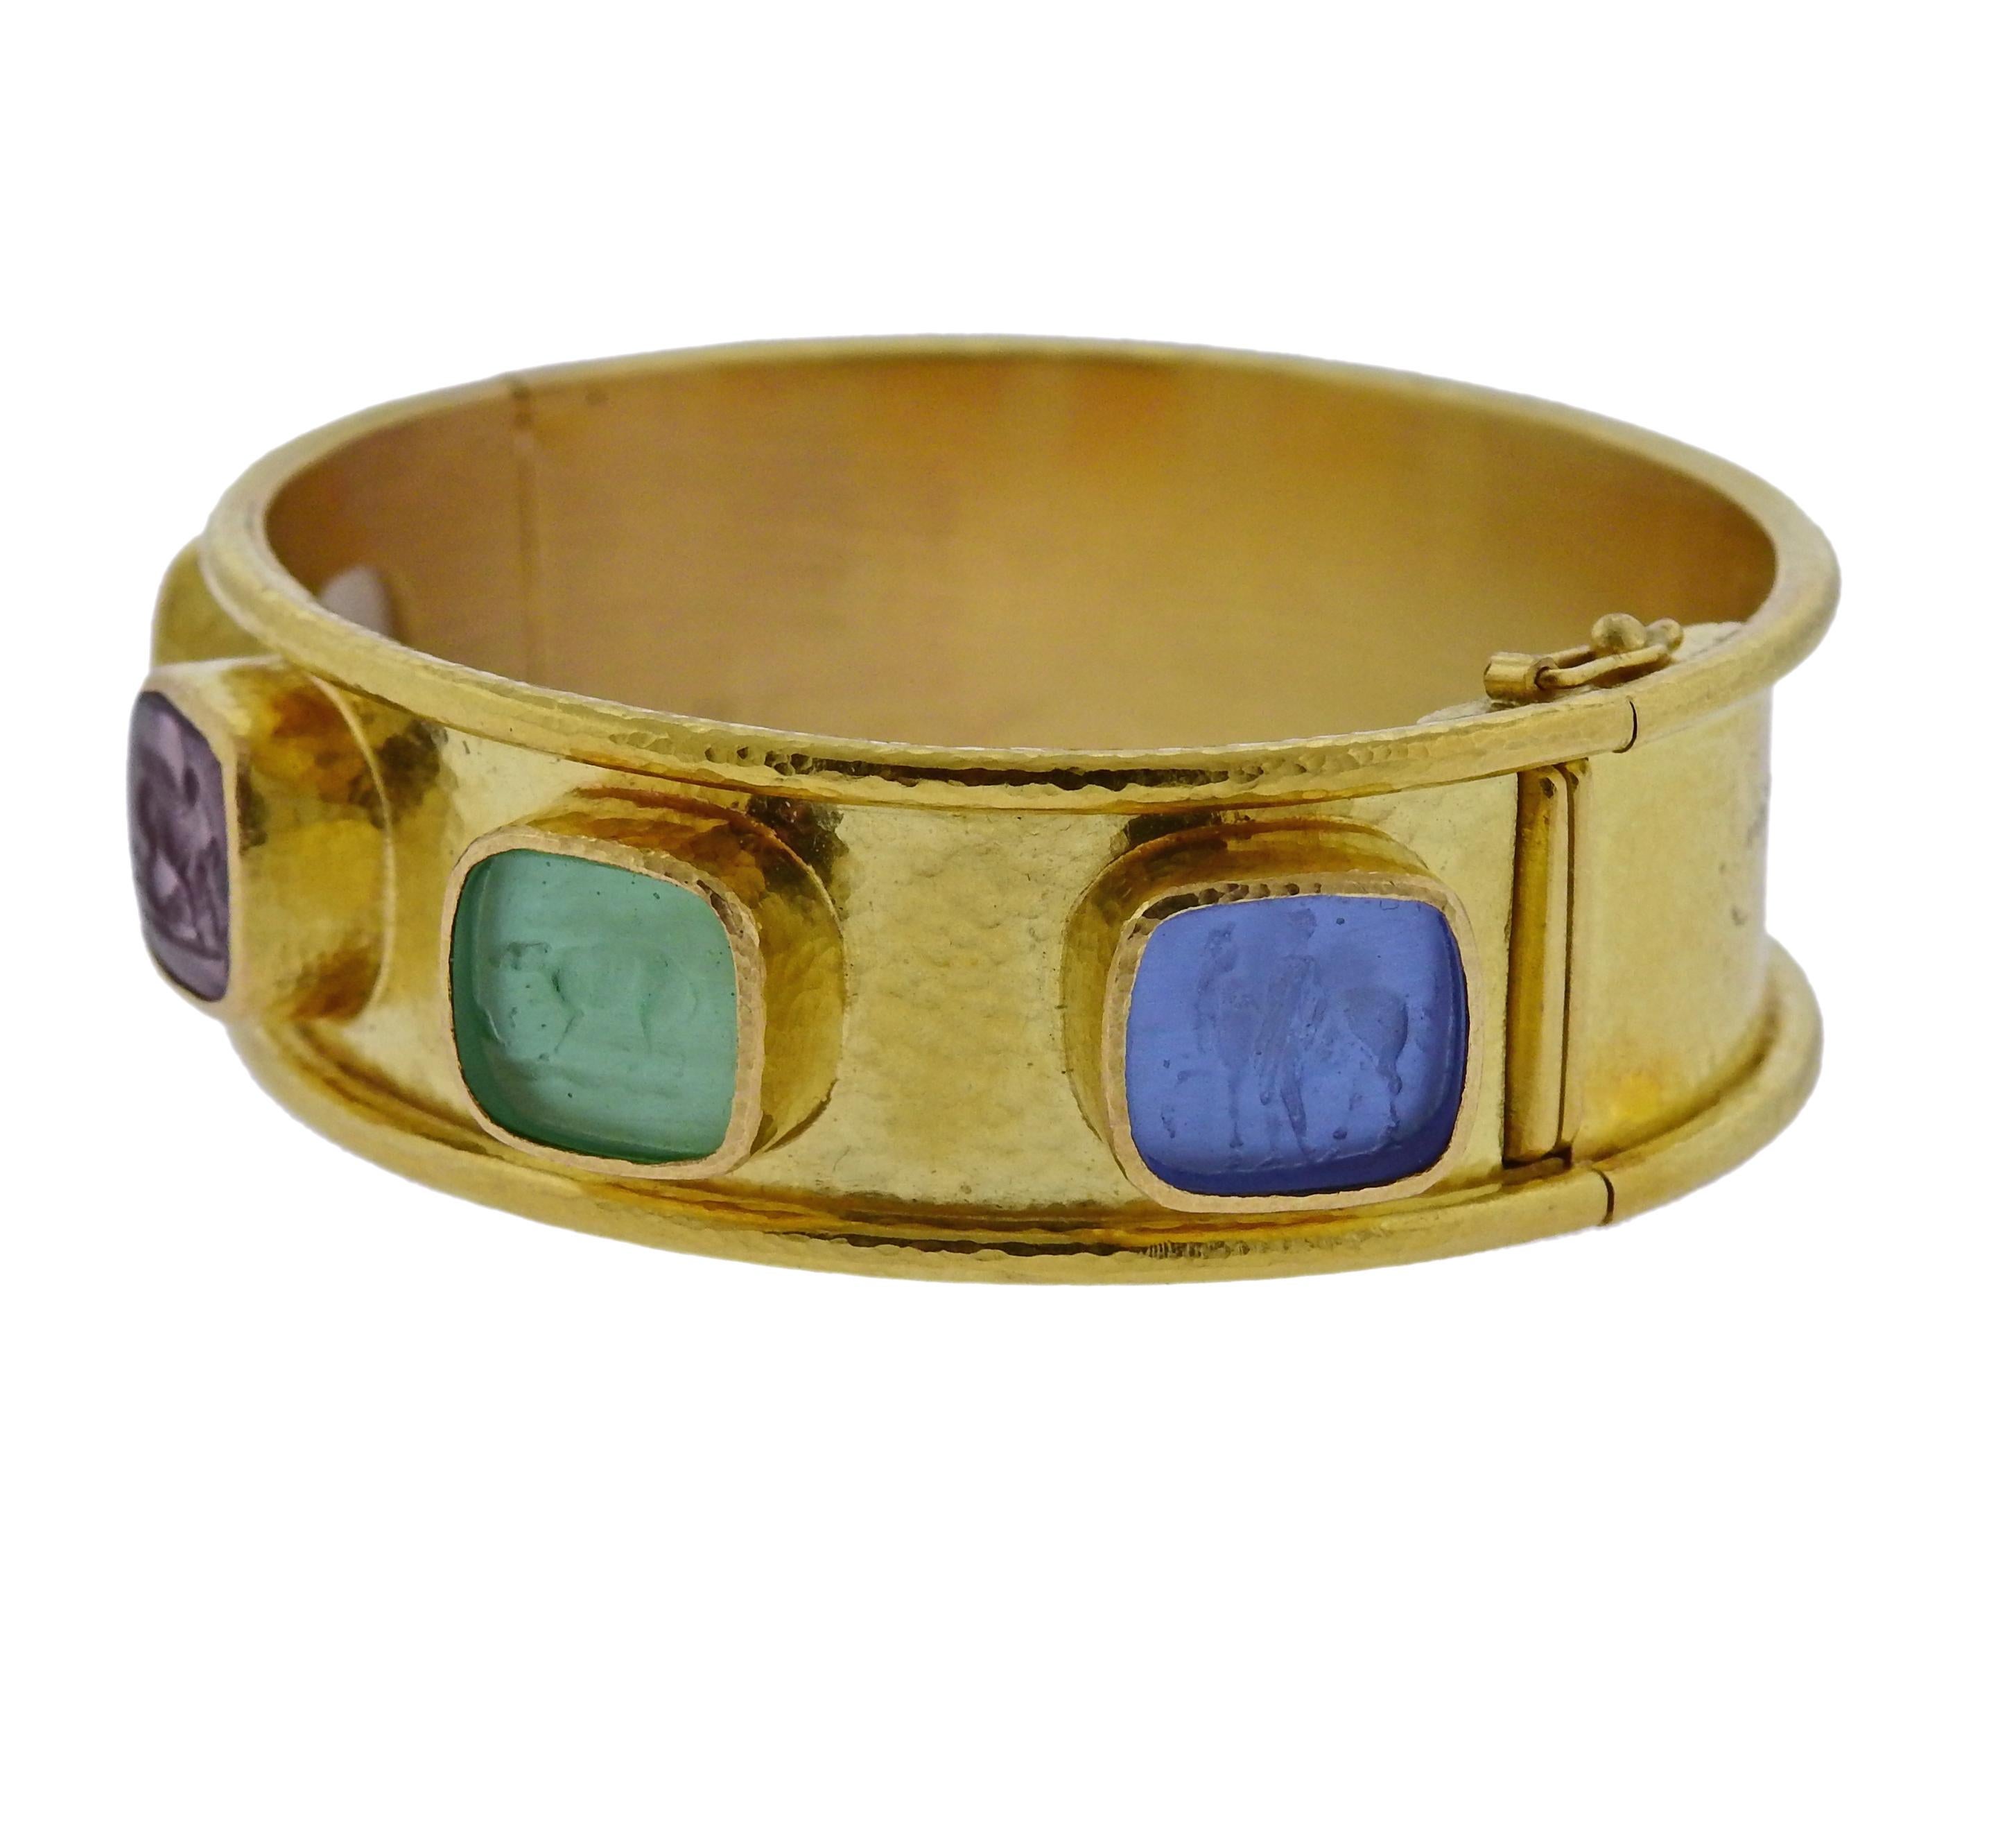 18k gold bangle bracelet, designed by Elizabeth Locke, set with multi color Venetian glass intaglios, all backed with mother of pearl. Bracelet will fit approx. 6.5